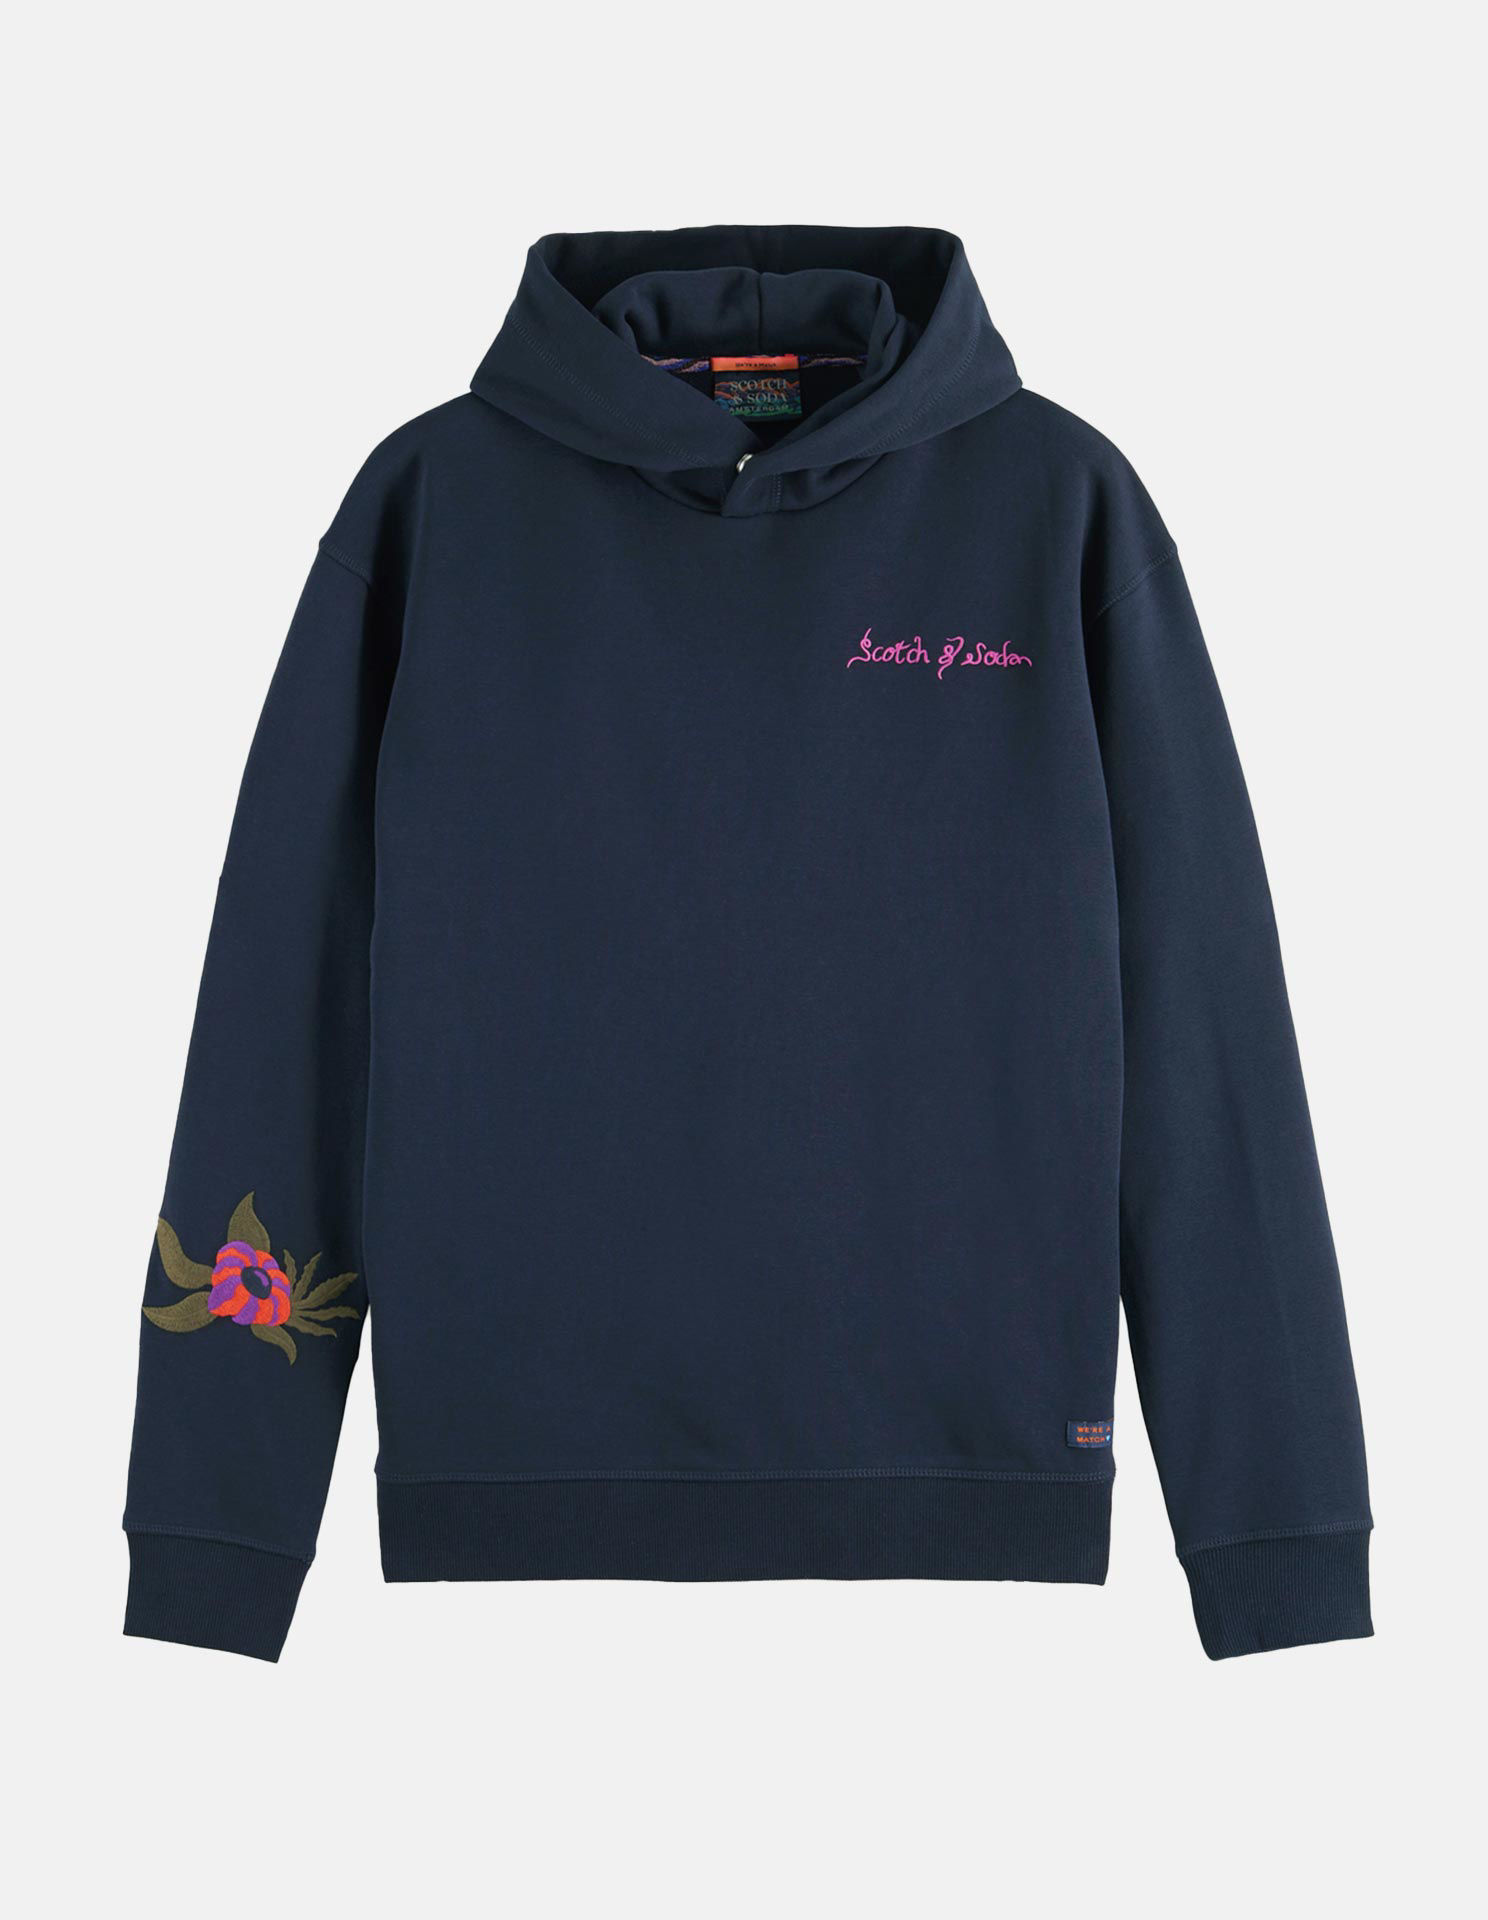 Scotch & Soda Floral Embroidered Hooded Sweatshirt - George Harrison ...